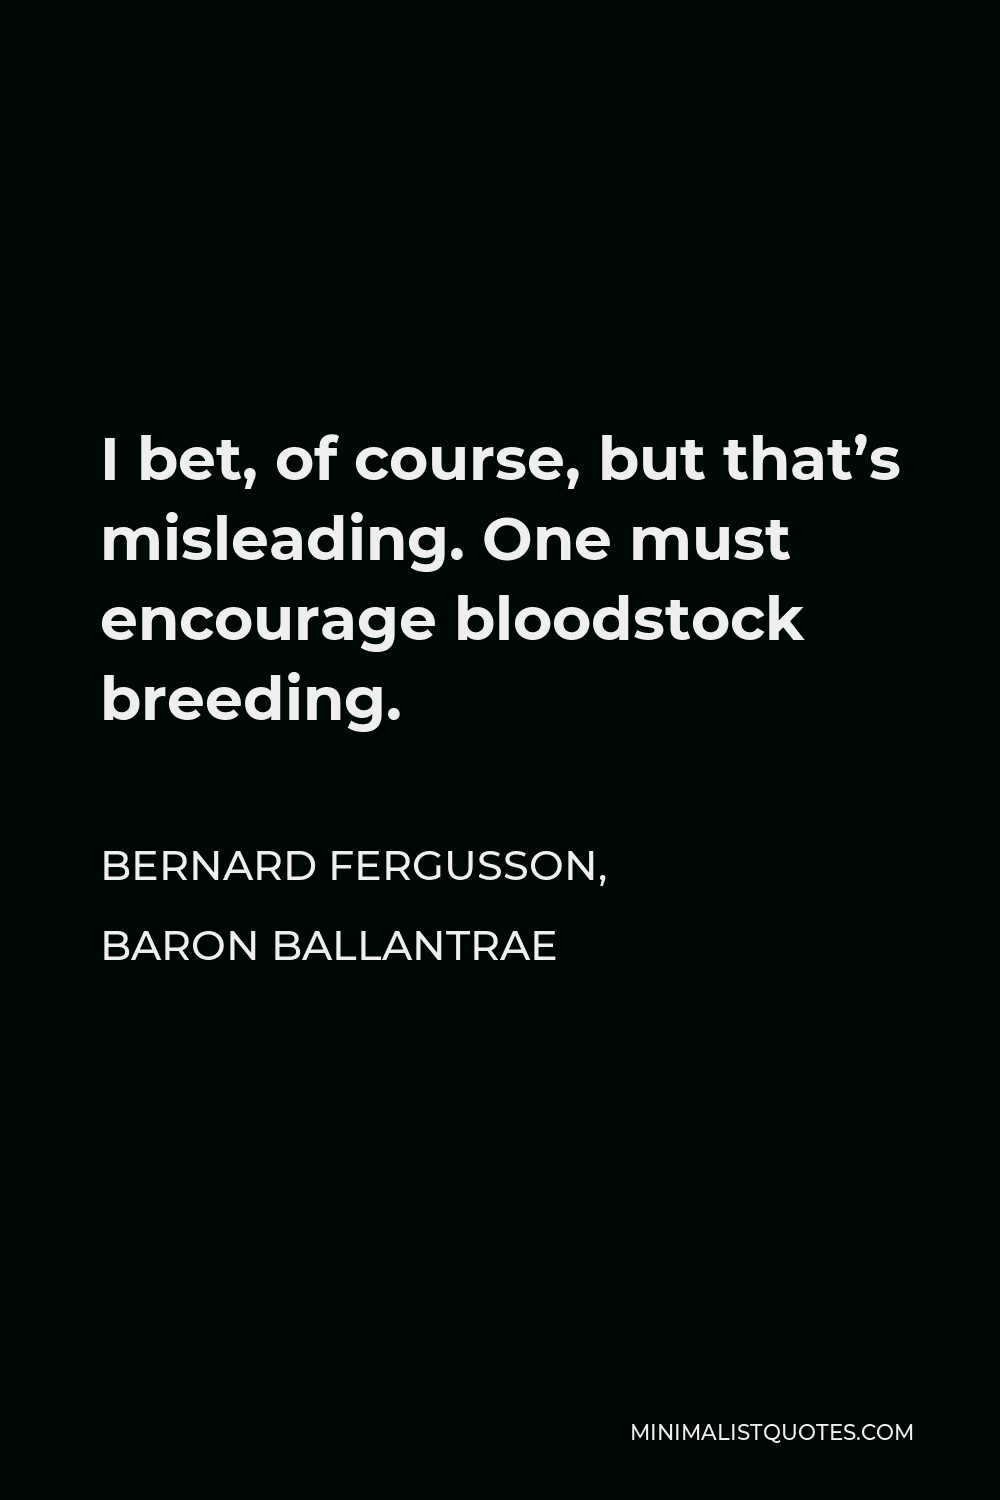 Bernard Fergusson, Baron Ballantrae Quote - I bet, of course, but that’s misleading. One must encourage bloodstock breeding.